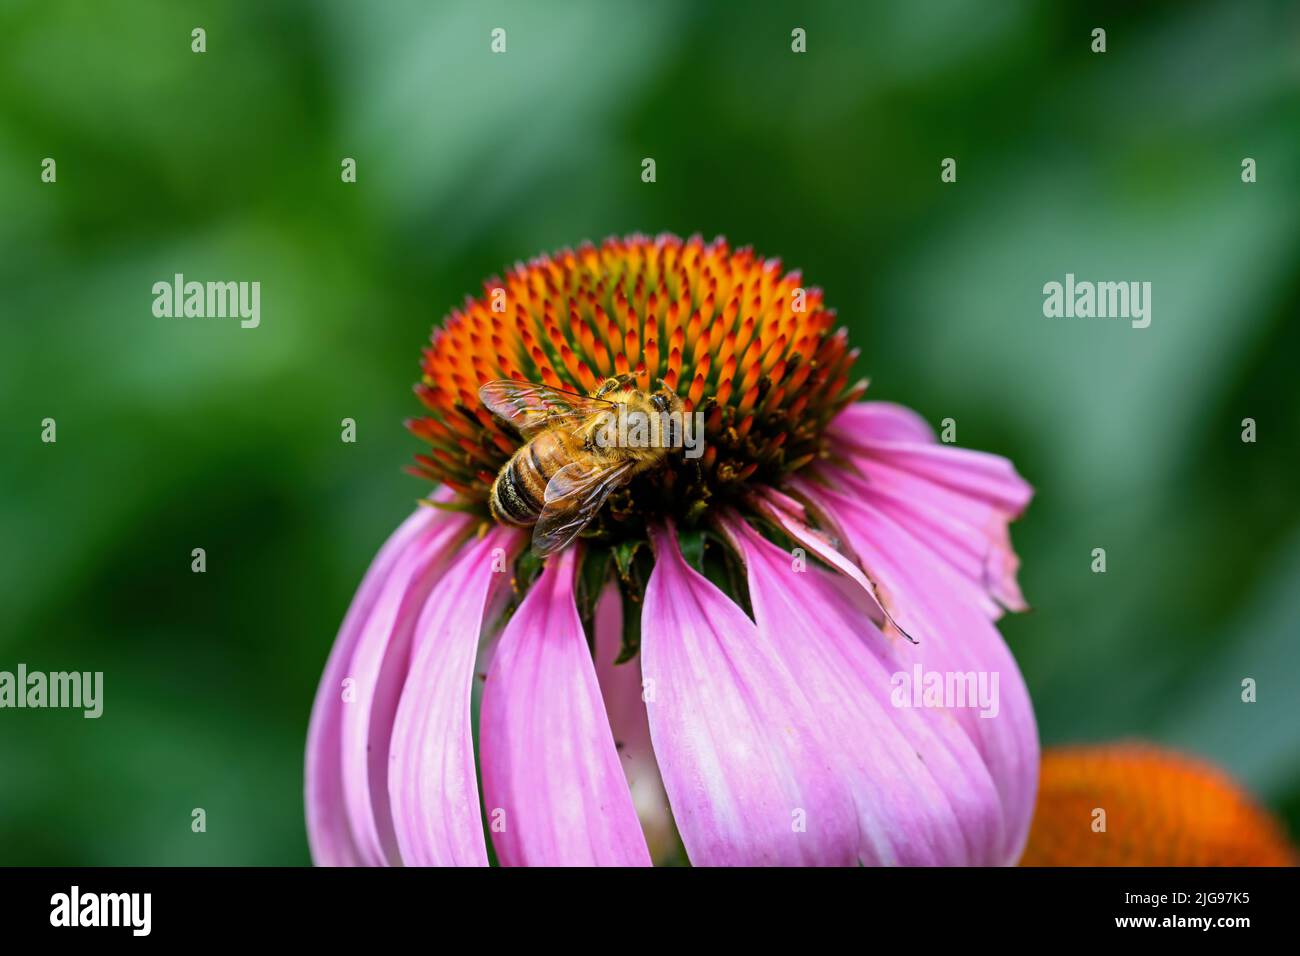 Honeybee on Echinacea flower. The bees construct perennial, colonial nests from wax. The best known is the western honey bee that has been domesticate Stock Photo